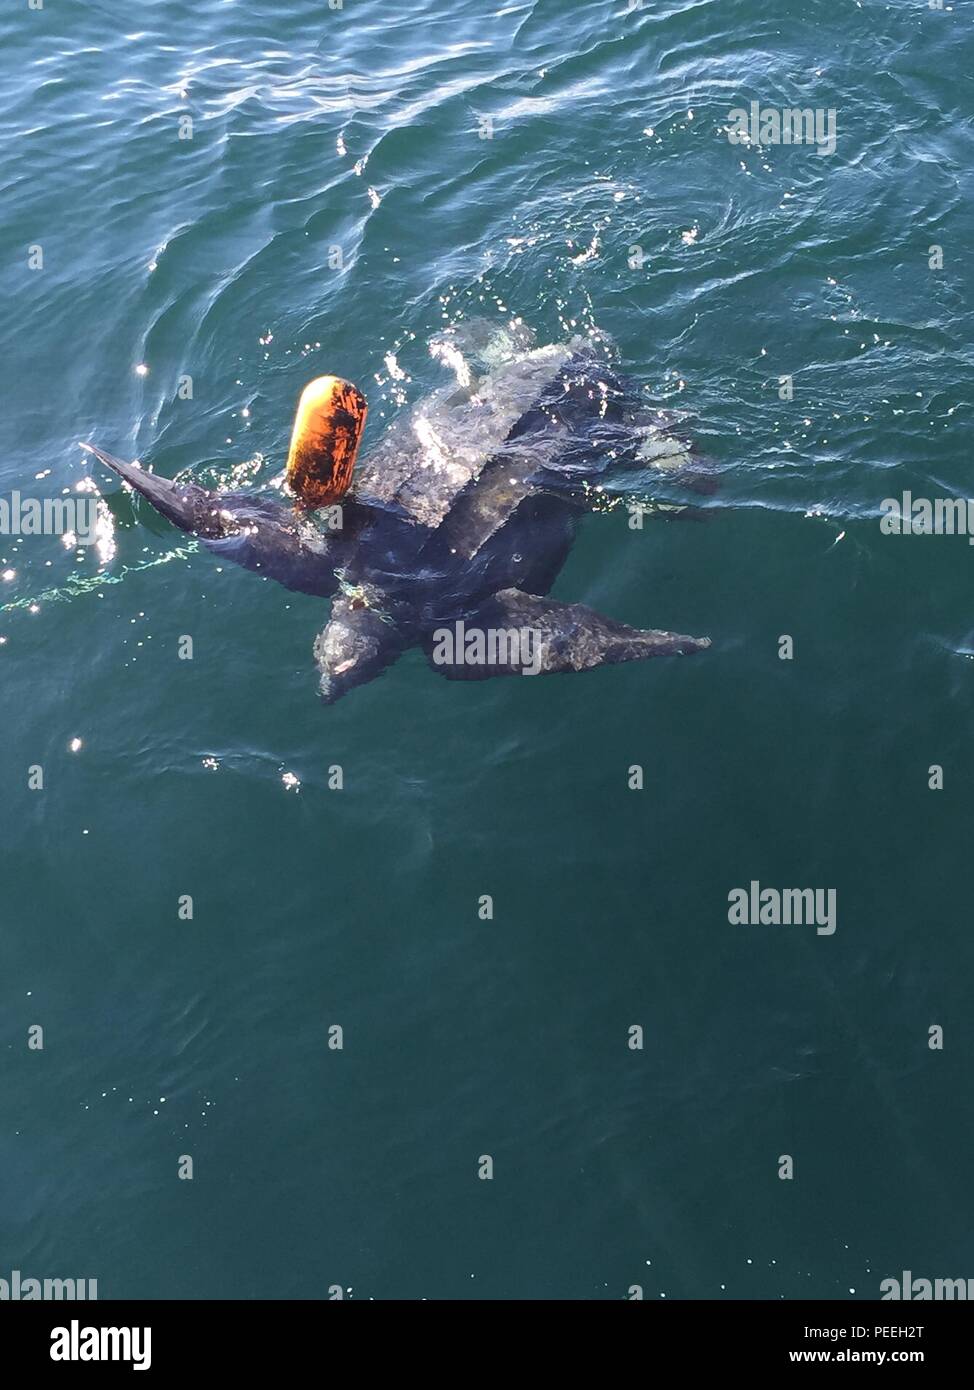 Coast Guard rescue crews from Station Menemsha on Martha's Vineyard along with a member from The Center for Coastal Studies rescued a leatherback turtle near Nomans Land, Mass., Aug. 14, 2015. The turtle was entangled in fishing line and after being freed, swam away. (U.S. Coast Guard photo) Stock Photo